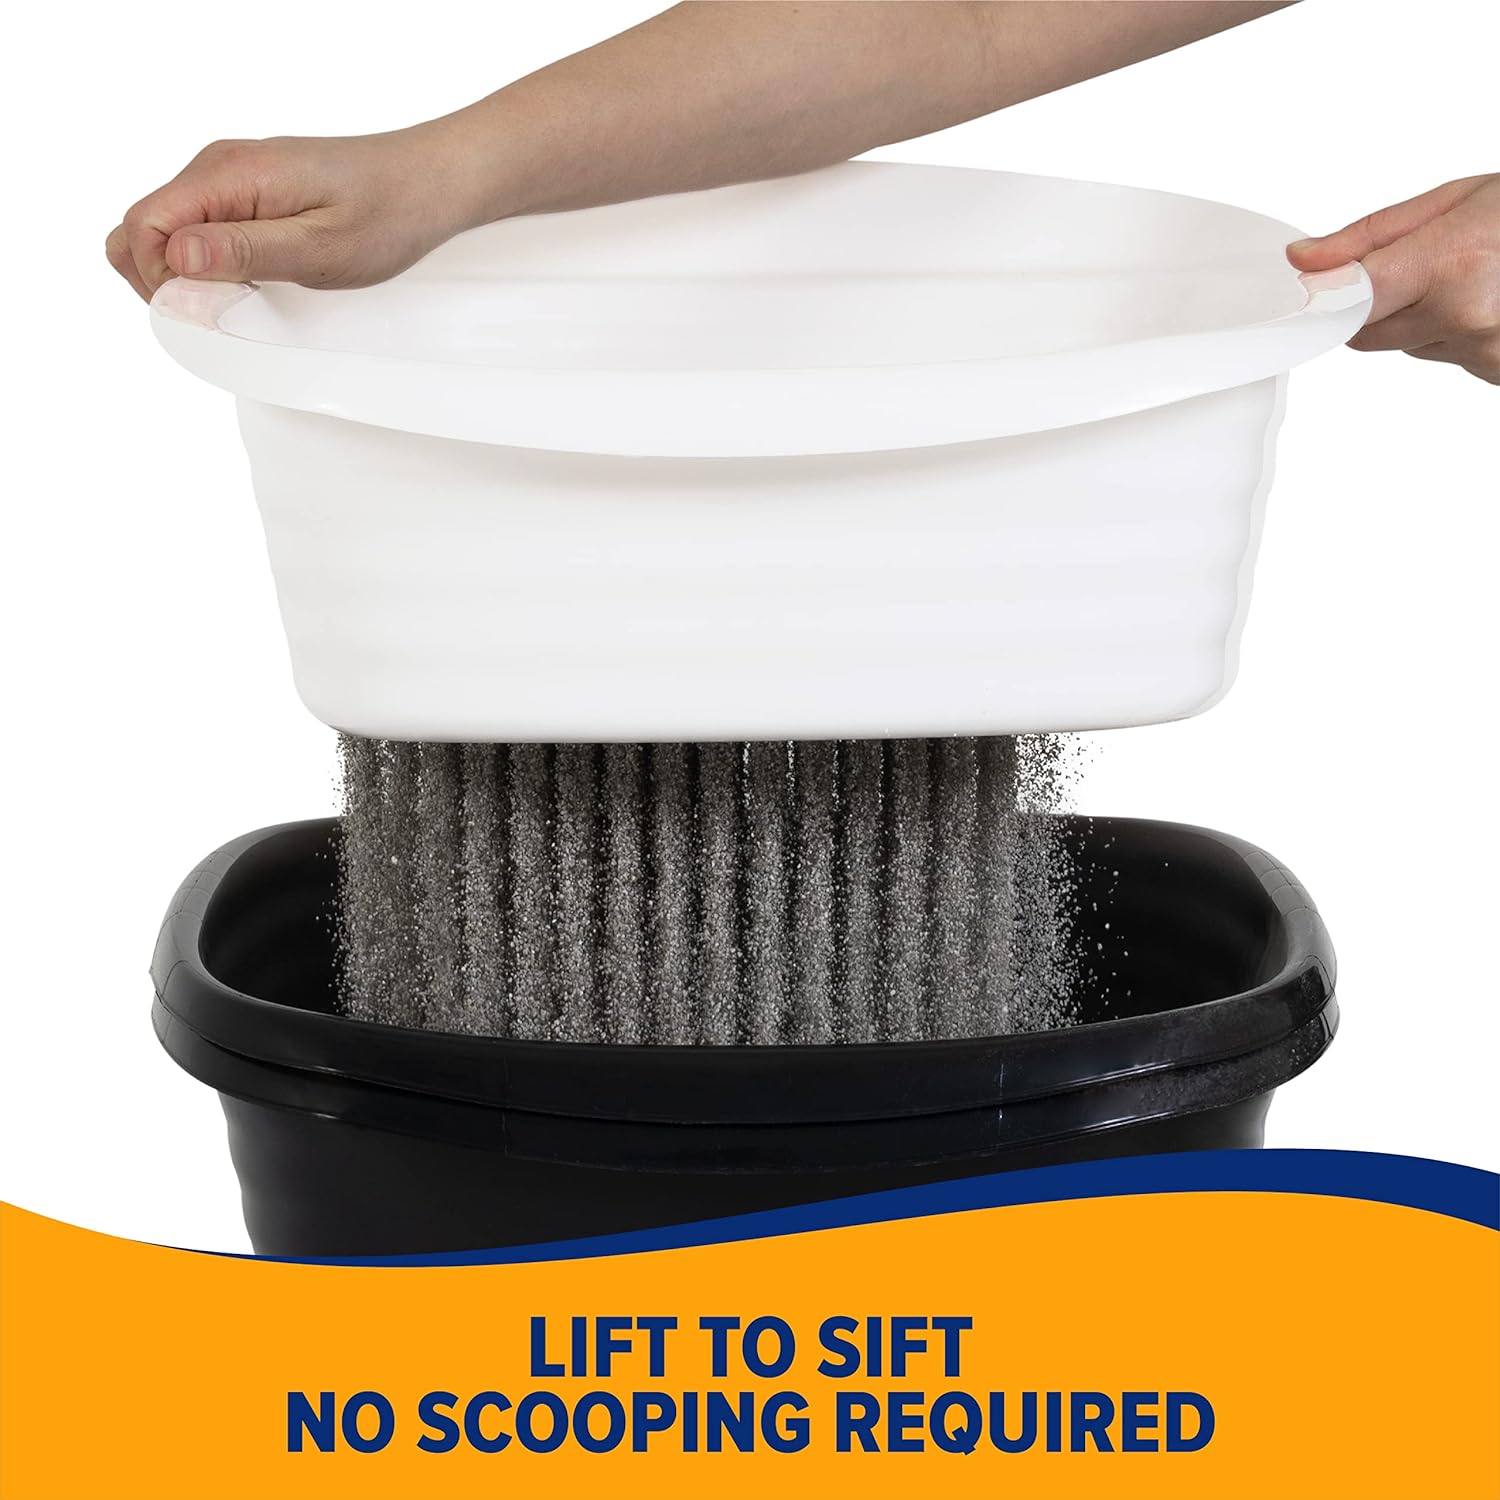 Petmate Arm & Hammer Large Sifting Litter Box, Lift to Sift, No Scooping Cat Litter Tray with Microban, Made in USA : Pet Supplies